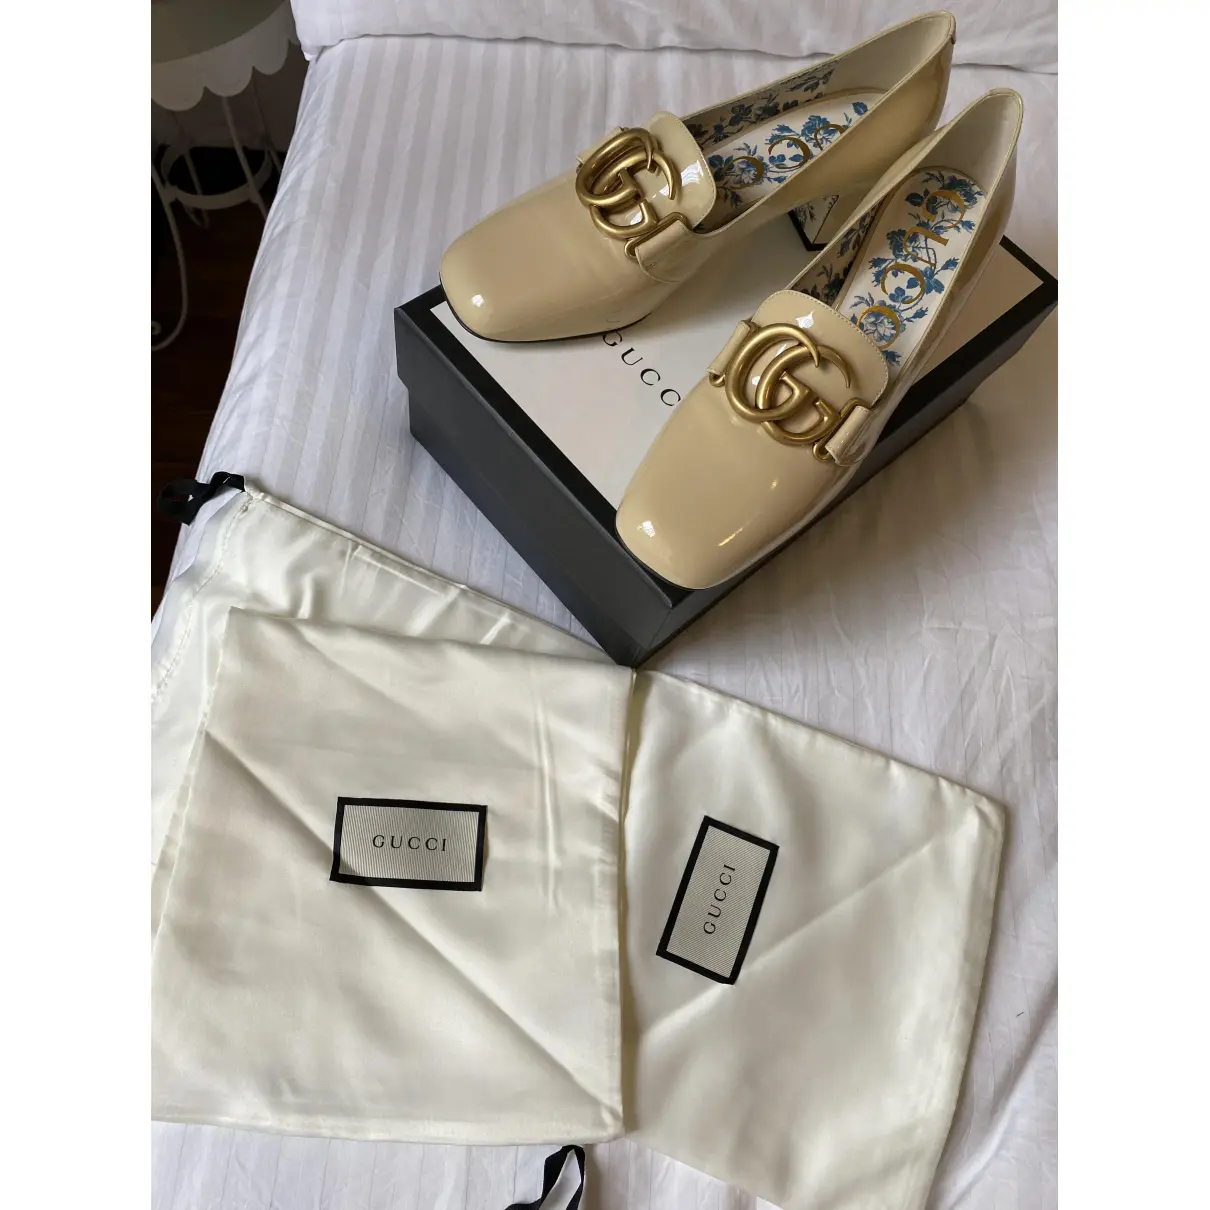 Buy Gucci Malaga patent leather flats online